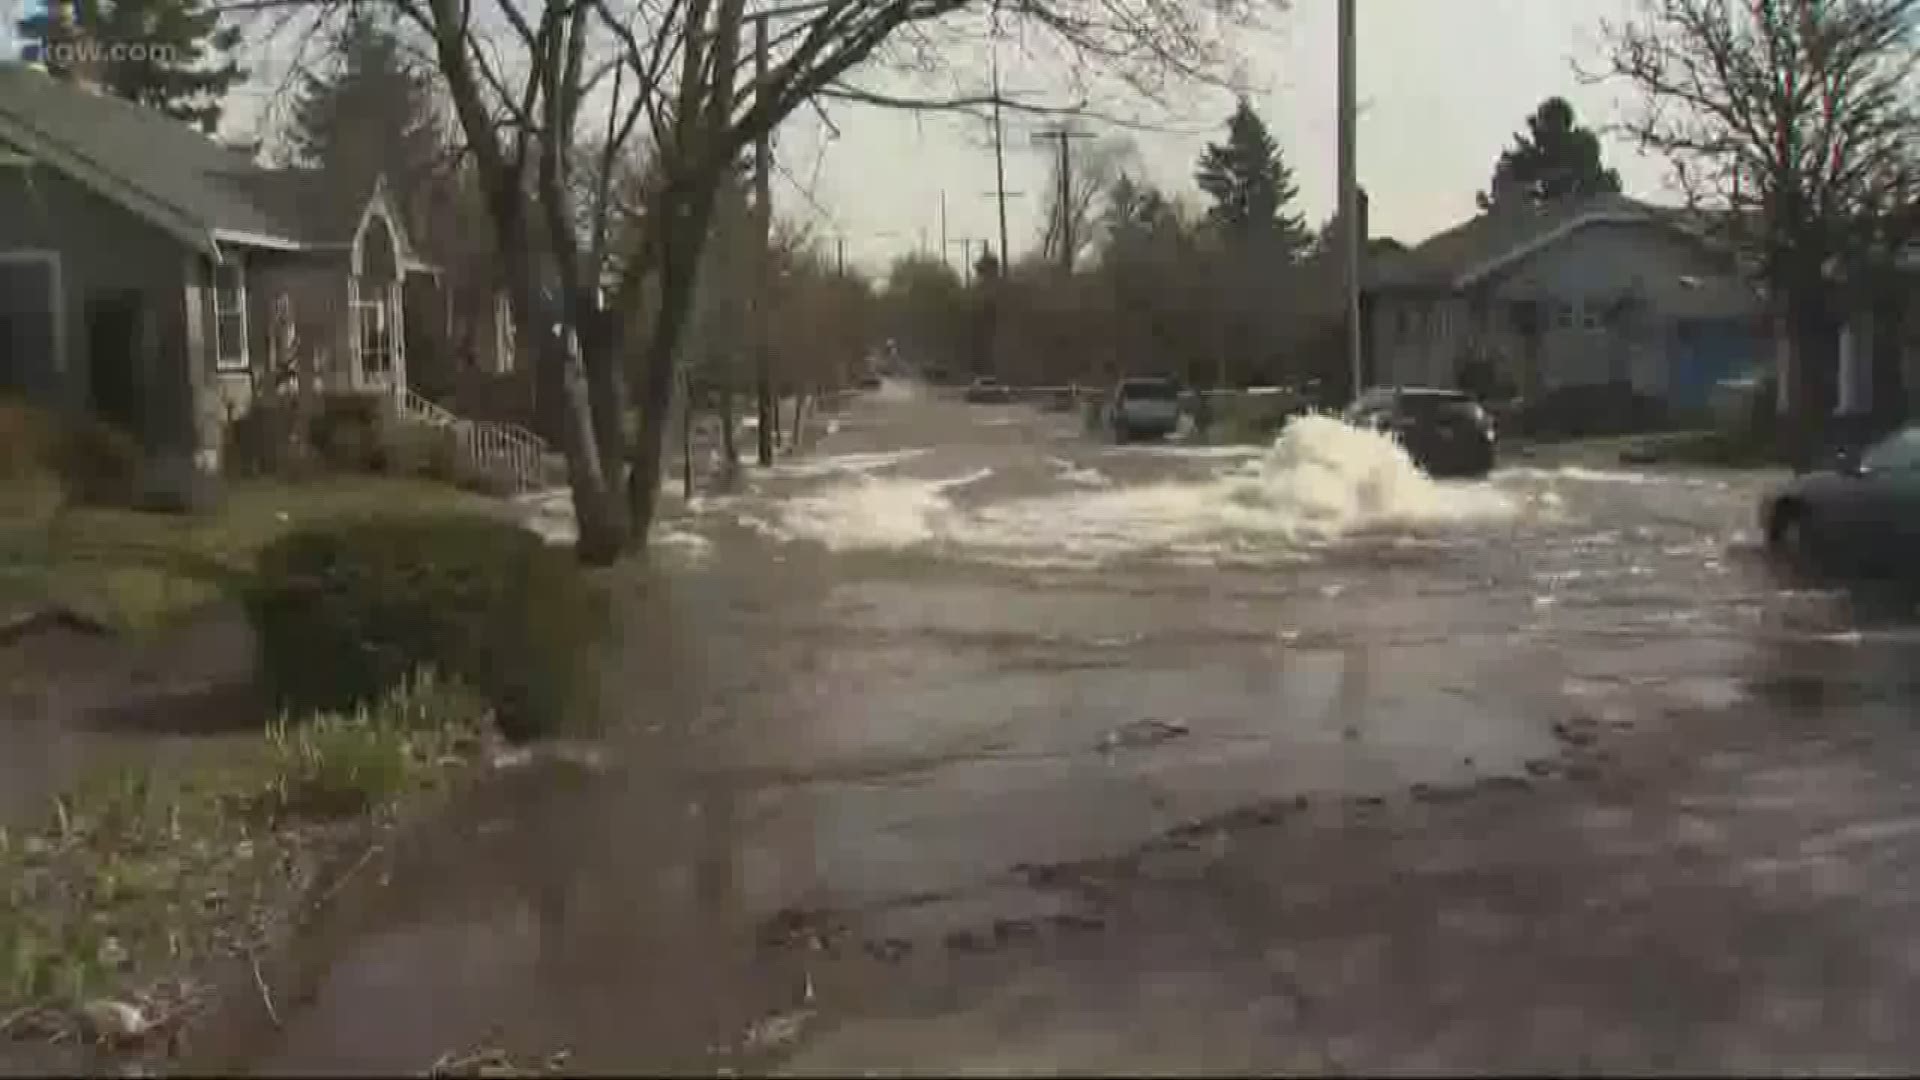 The head of the Portland Water Bureau sheds light on the devastating March water main break.